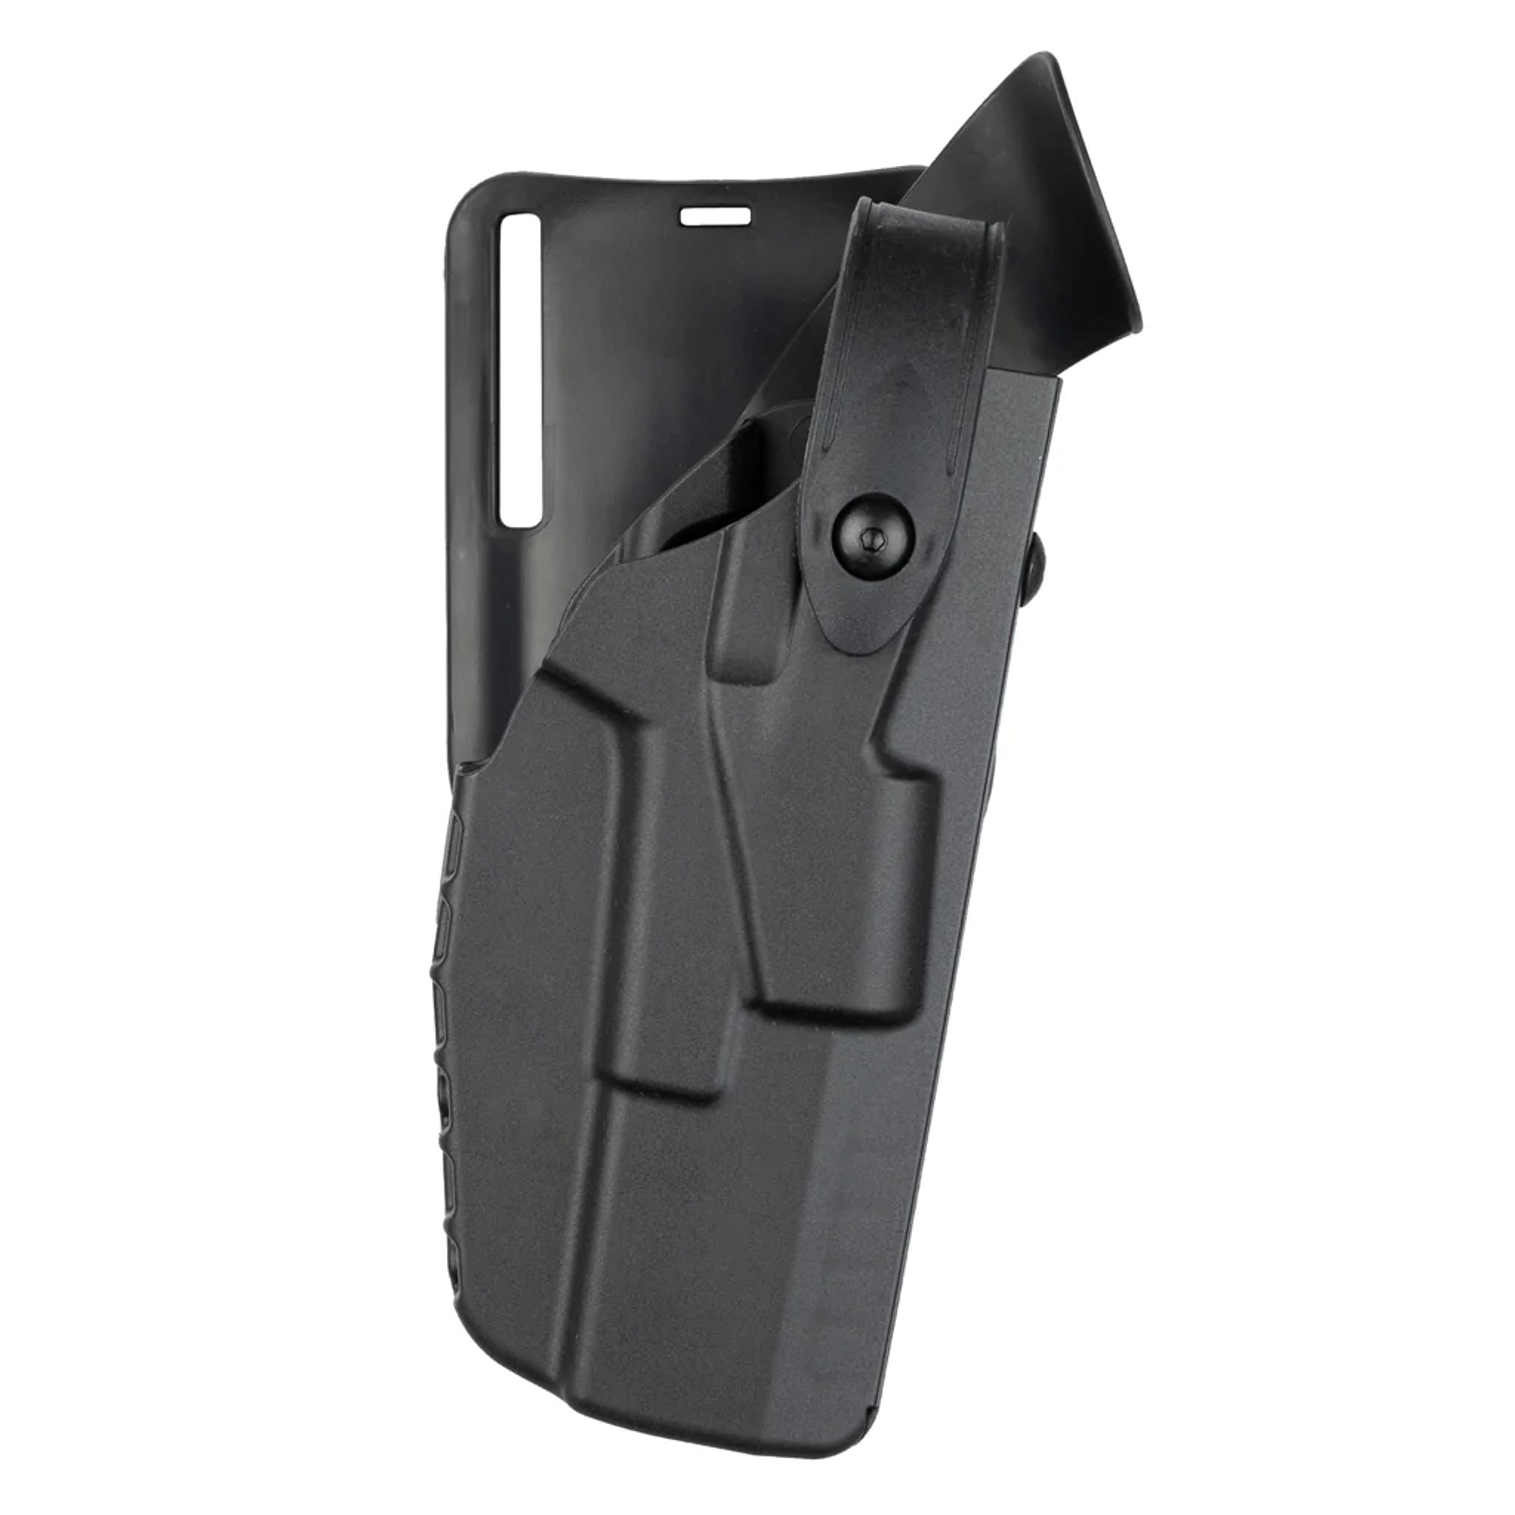 Model 7365 7ts Als/sls Low-ride, Level Iii Retention Duty Holster For Smith & Wesson M&p 45 - KR7365-419-412